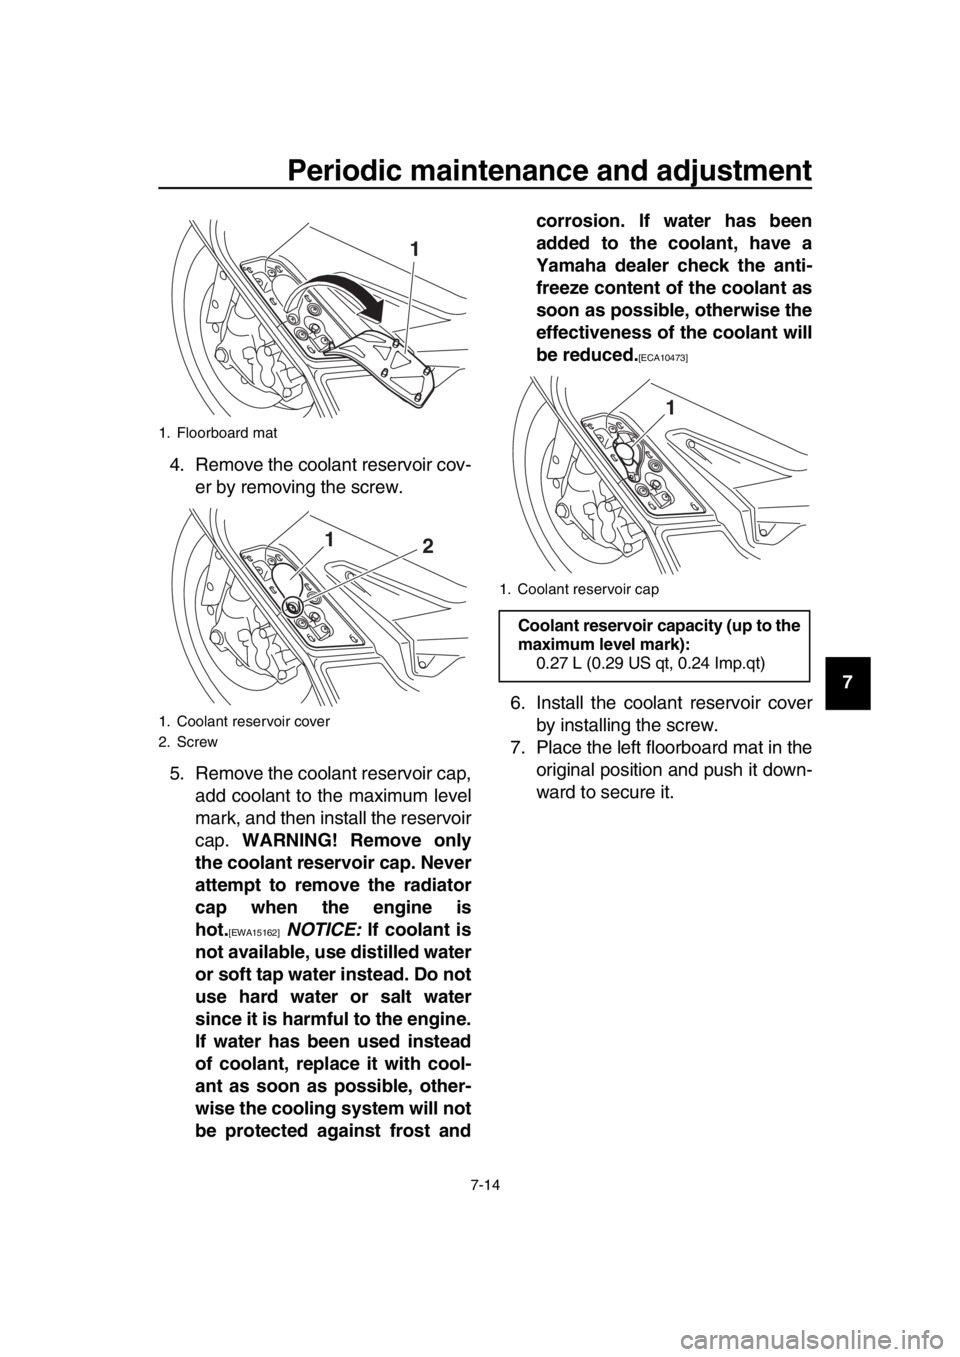 YAMAHA TMAX 2016  Owners Manual Periodic maintenance and adjustment
7-14
1
2
3
4
5
6
7
8
9
10
11
12
13
14
4. Remove the coolant reservoir cov-
er by removing the screw.
5. Remove the coolant reservoir cap, add coolant to the maximum